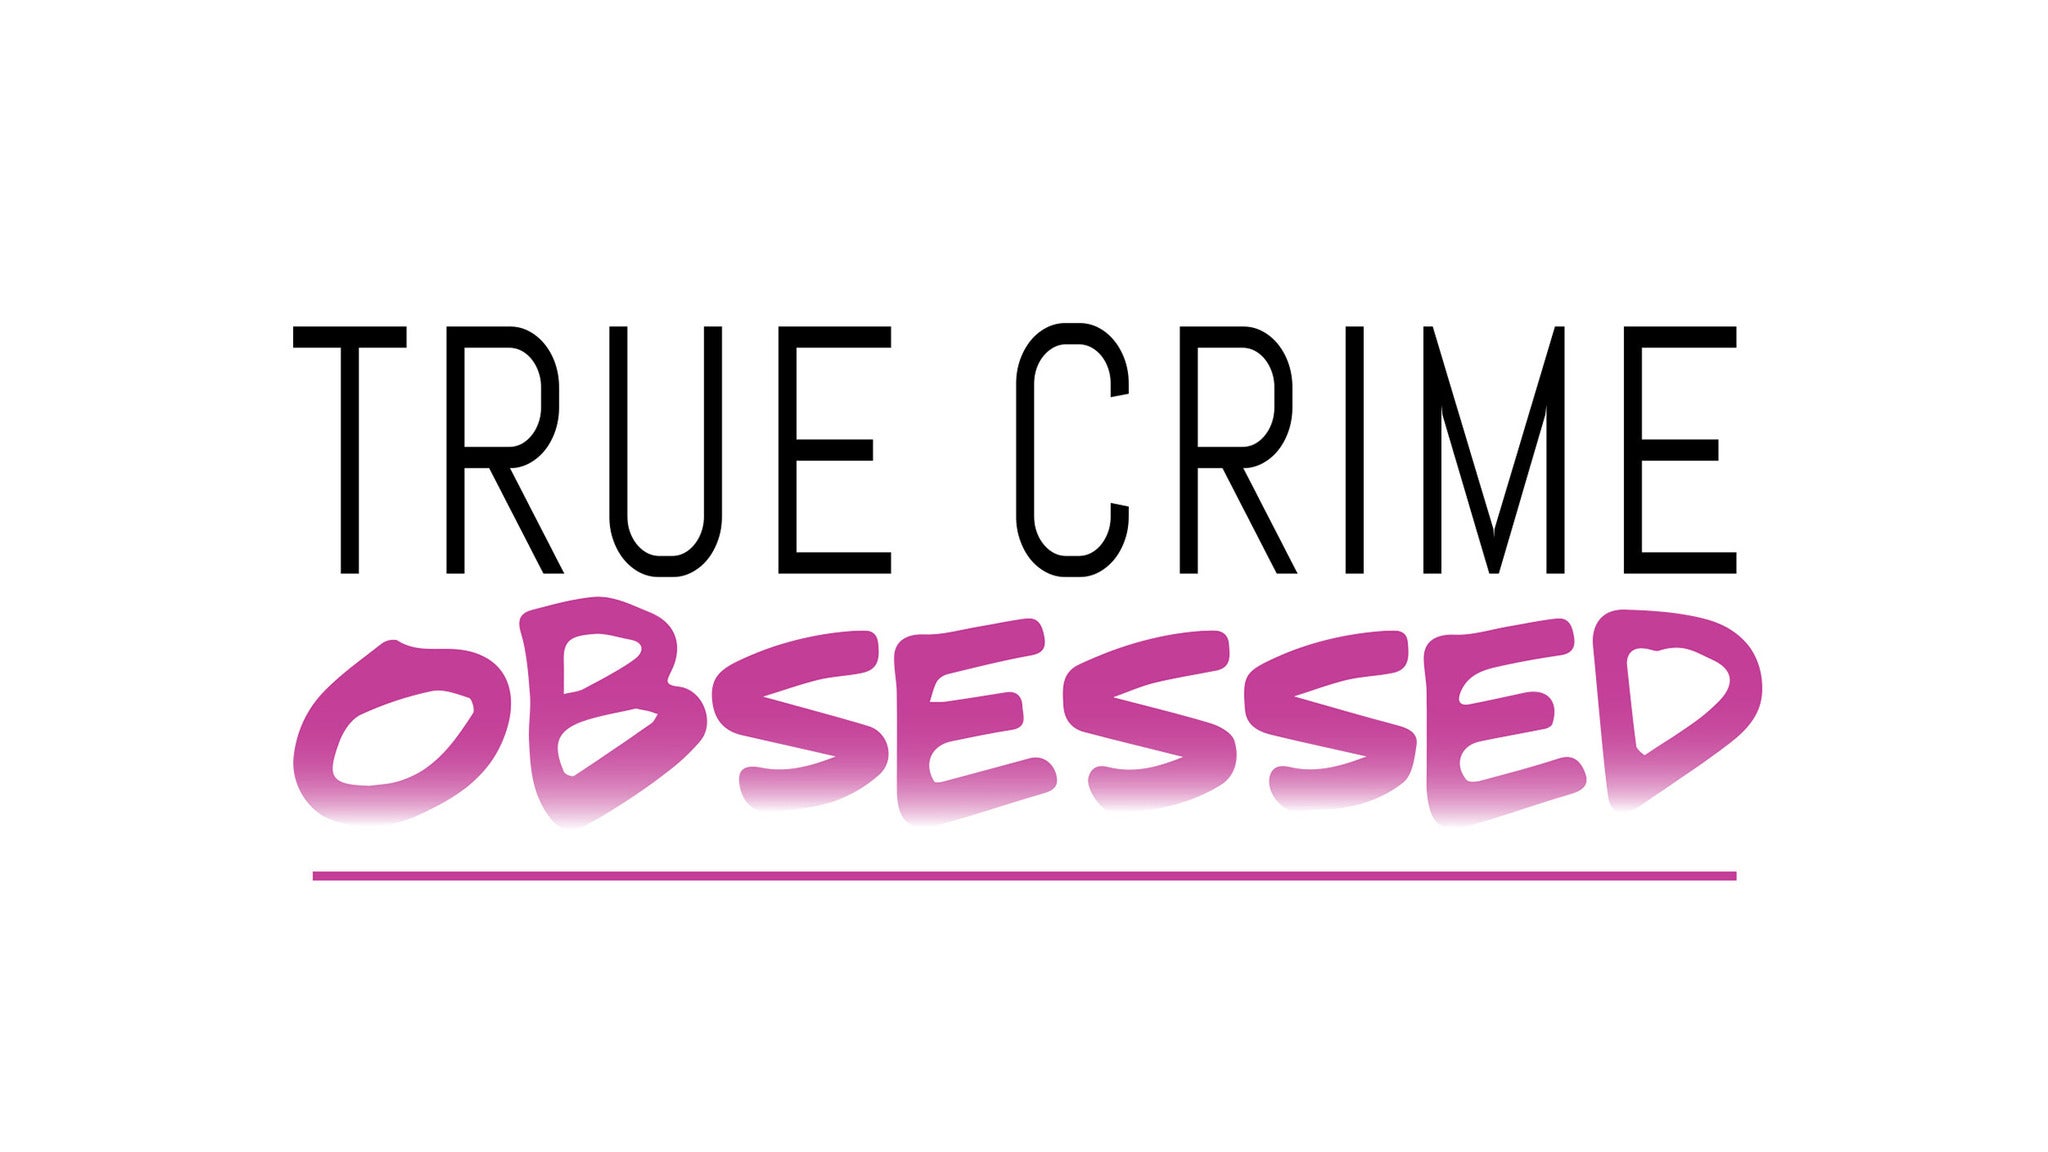 True Crime Obsessed Live! in Los Angeles promo photo for Patreon presale offer code